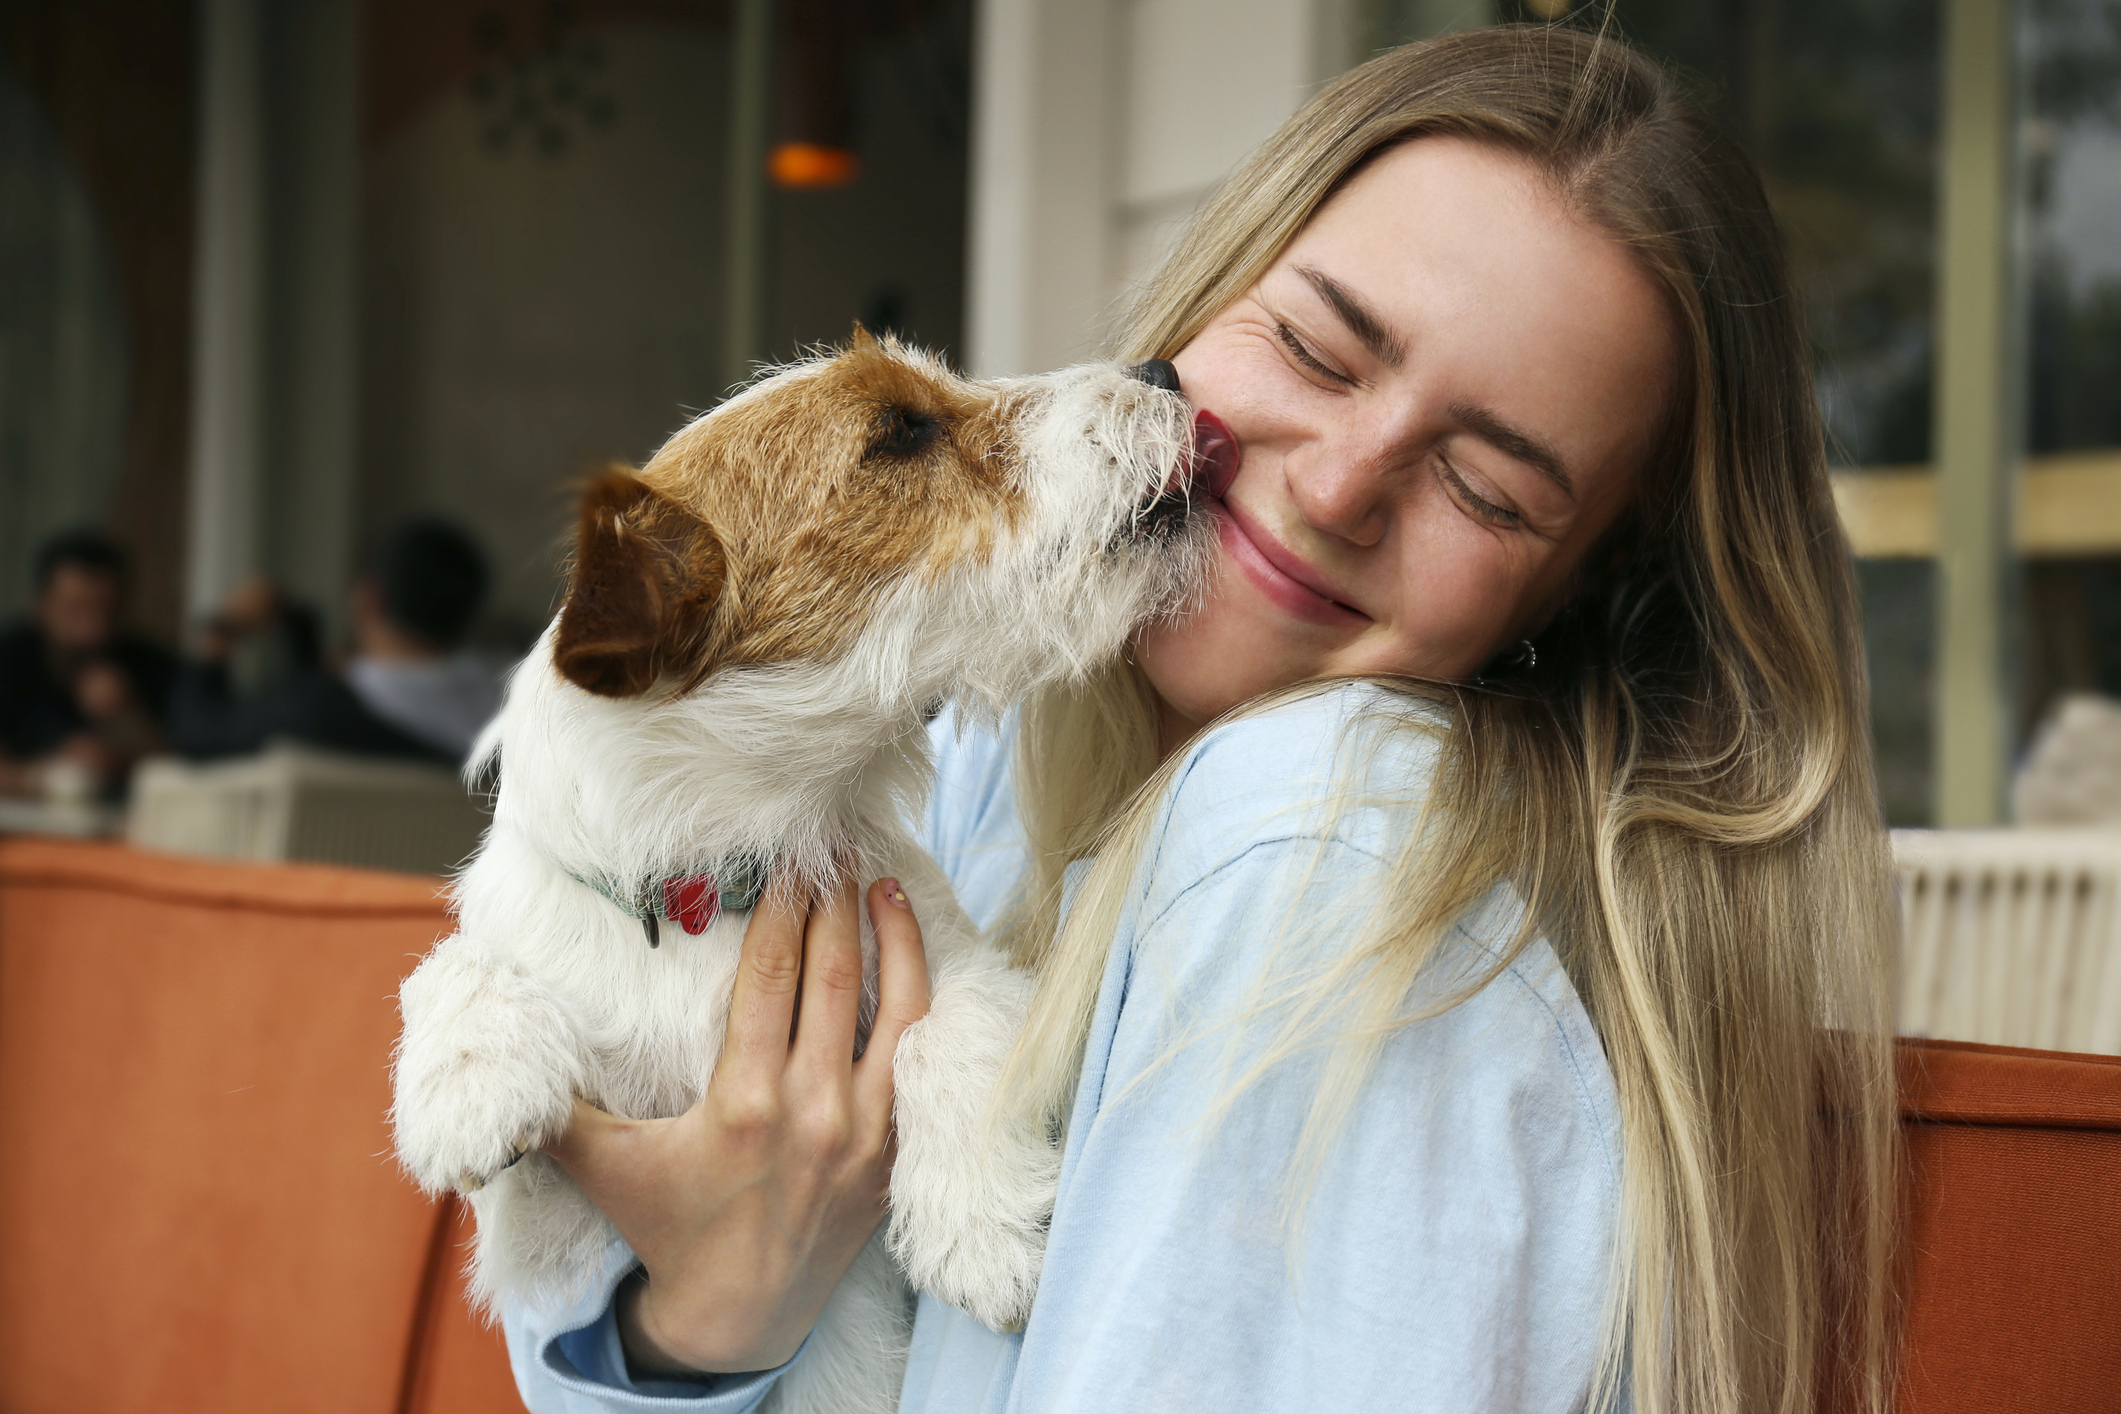 Jack Russell Terrier licking pet parent’s cheek outside on dog-friendly coffee house patio.